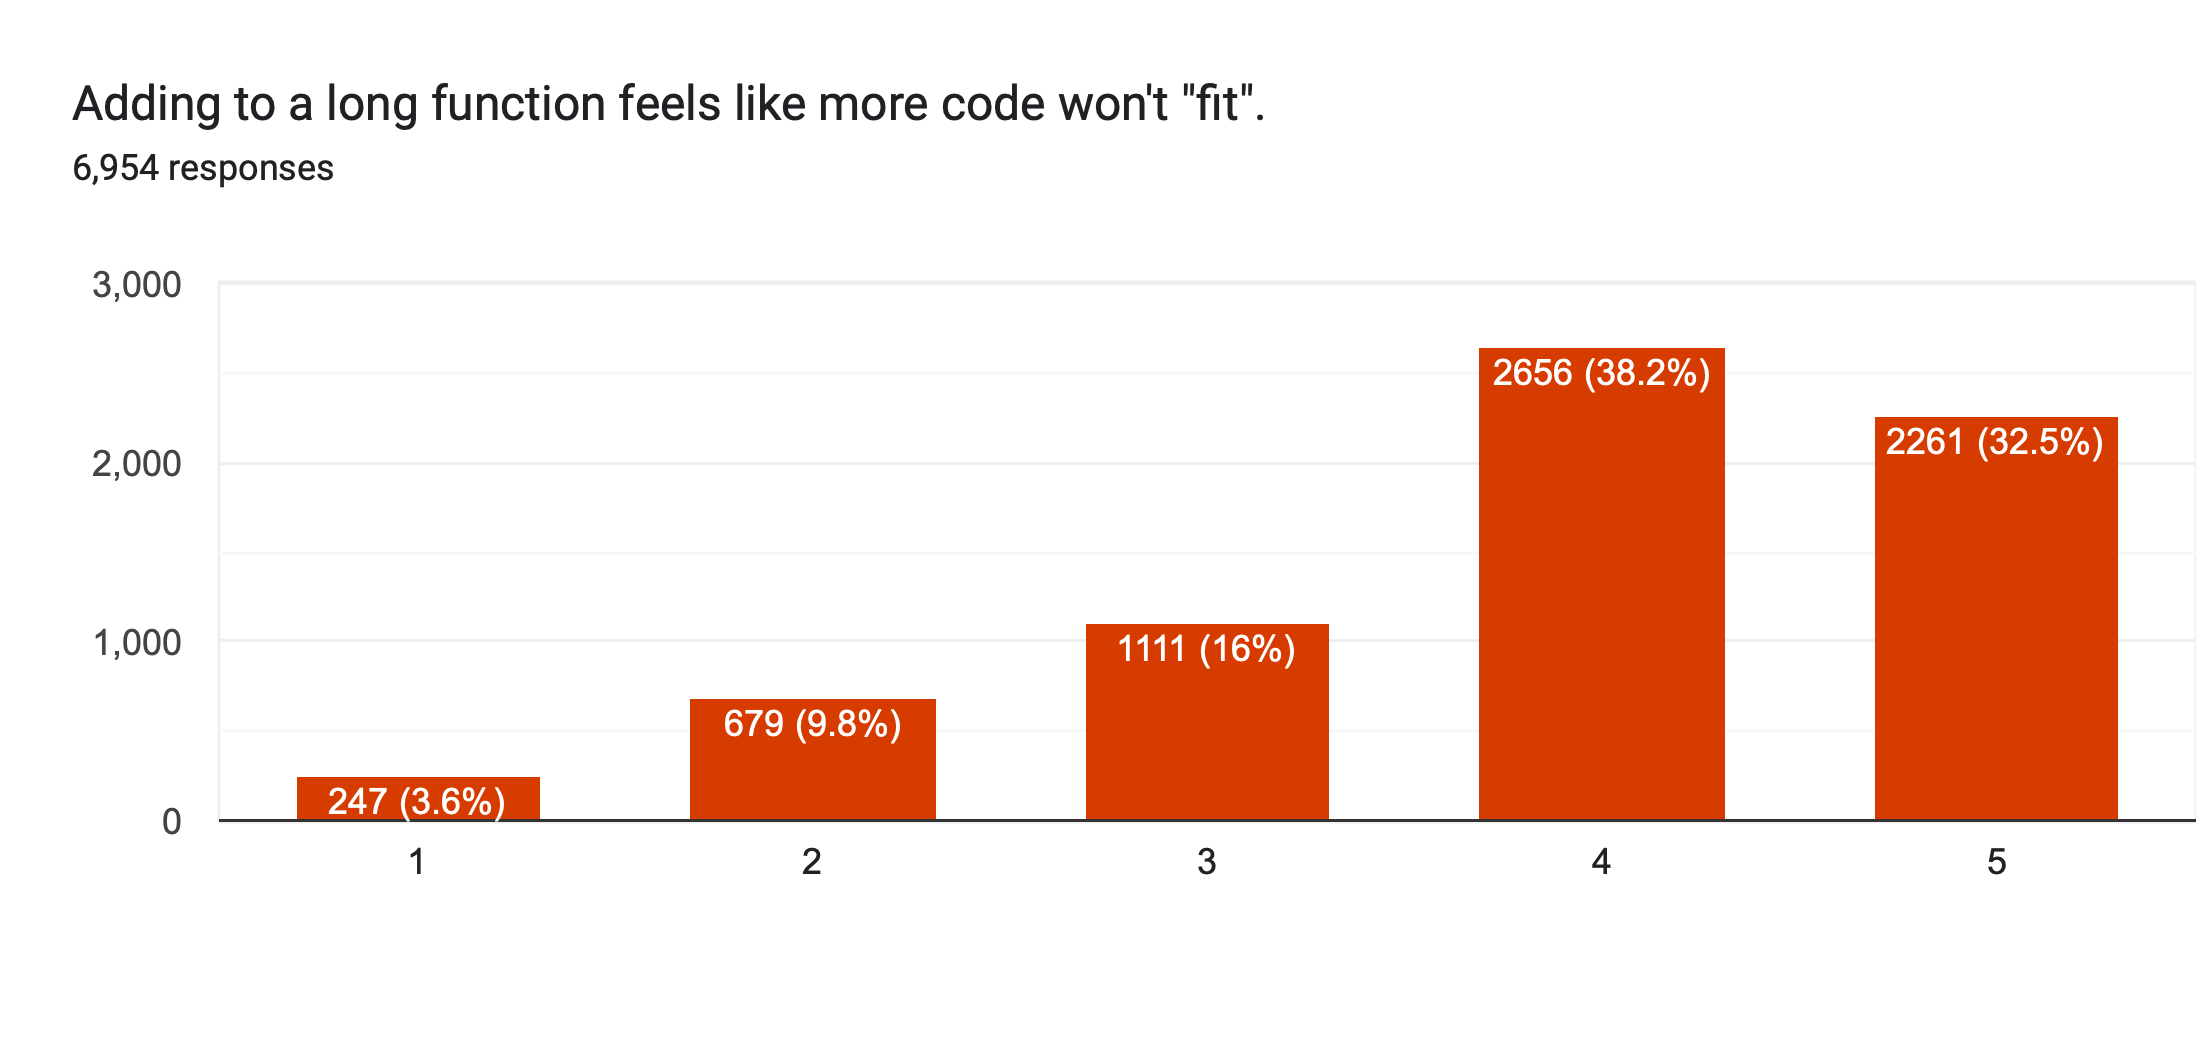 Chart showing most developers agree with the statement: Adding to a long function feels like more code won't fit.